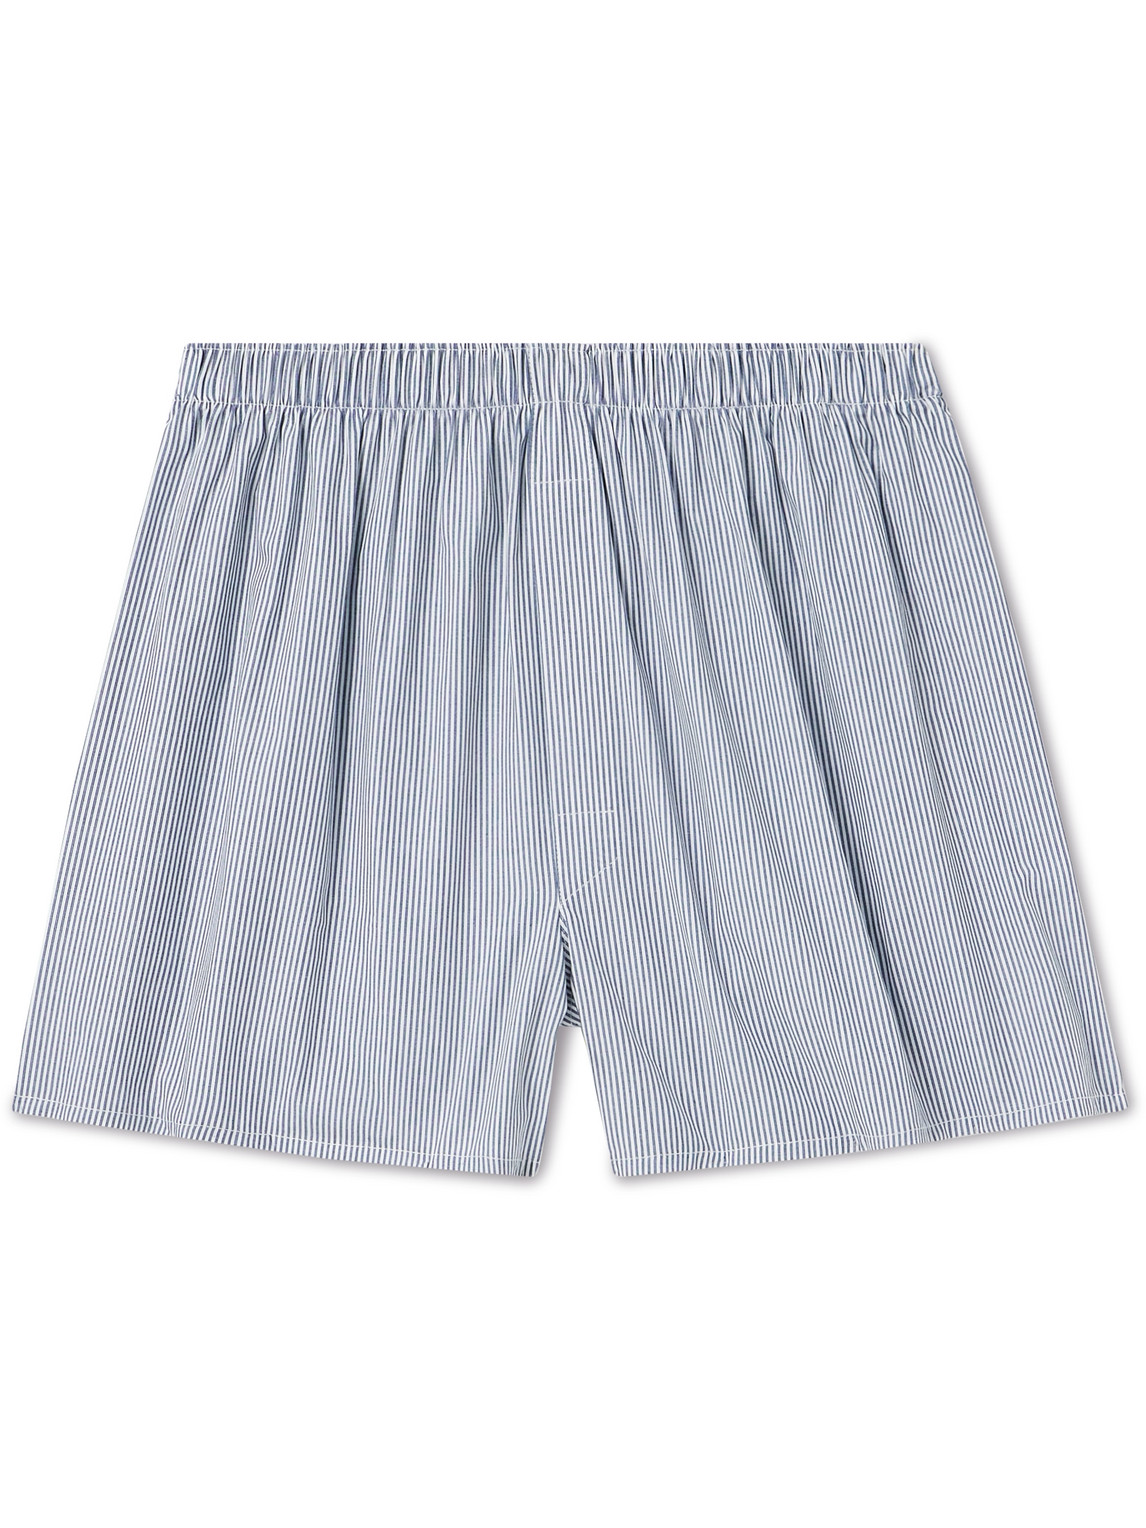 Sunspel Striped Cotton Boxer Shorts In Blue